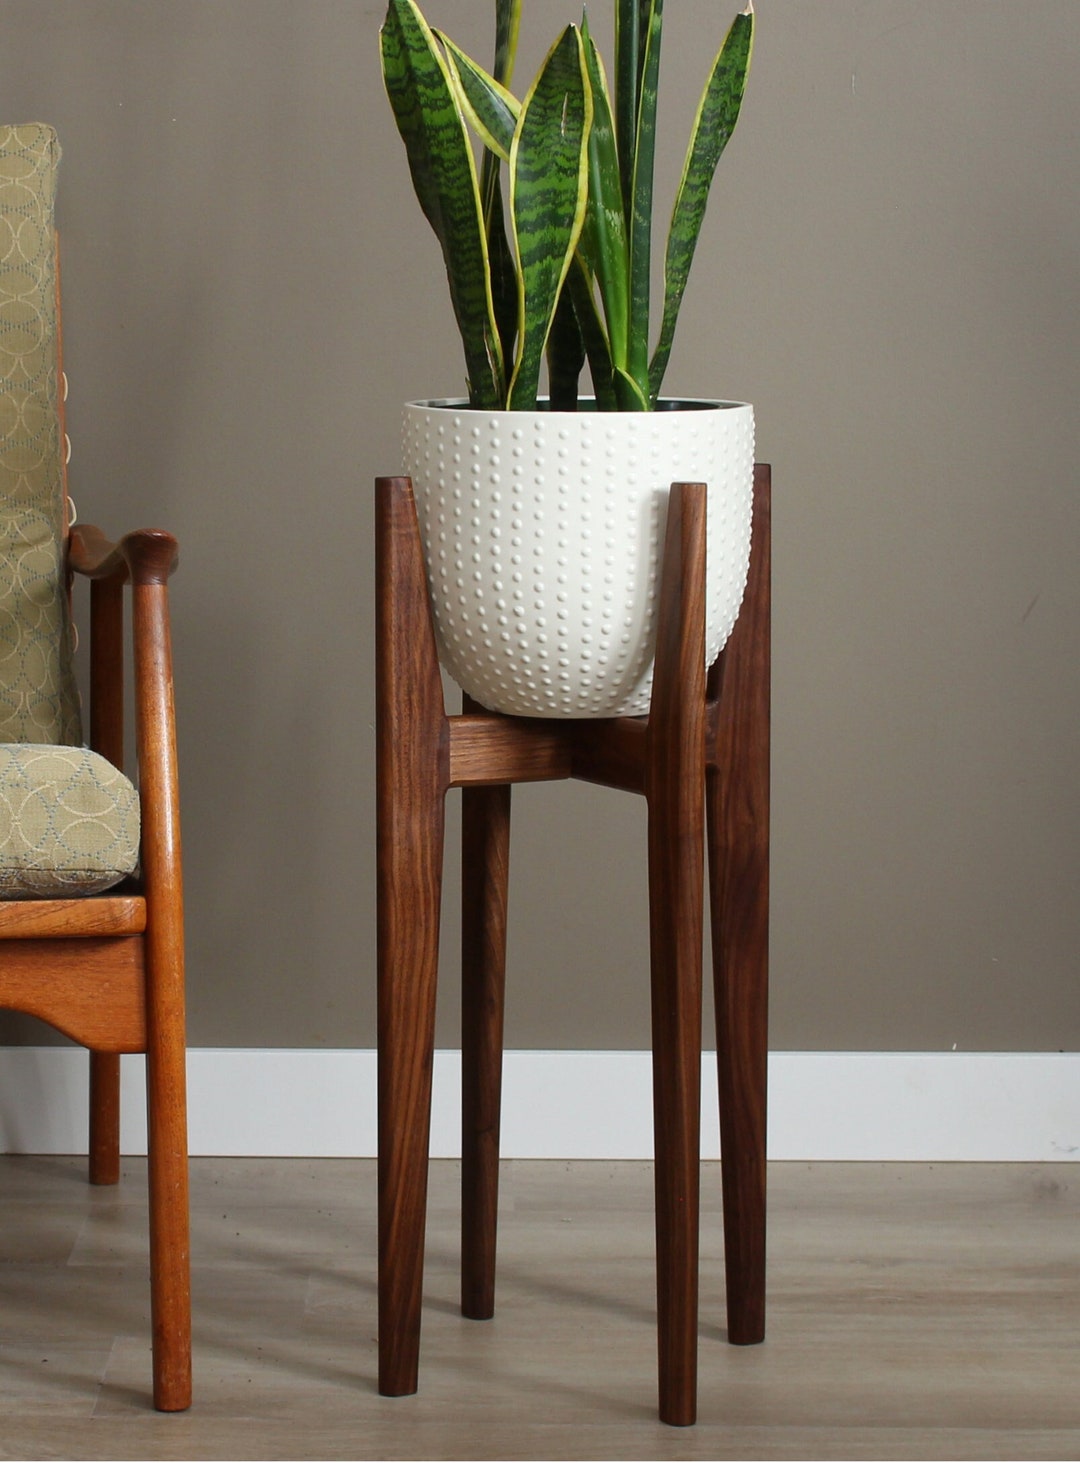 Tall Indoor Plant Stand Mid Century Modern Inspired Design image